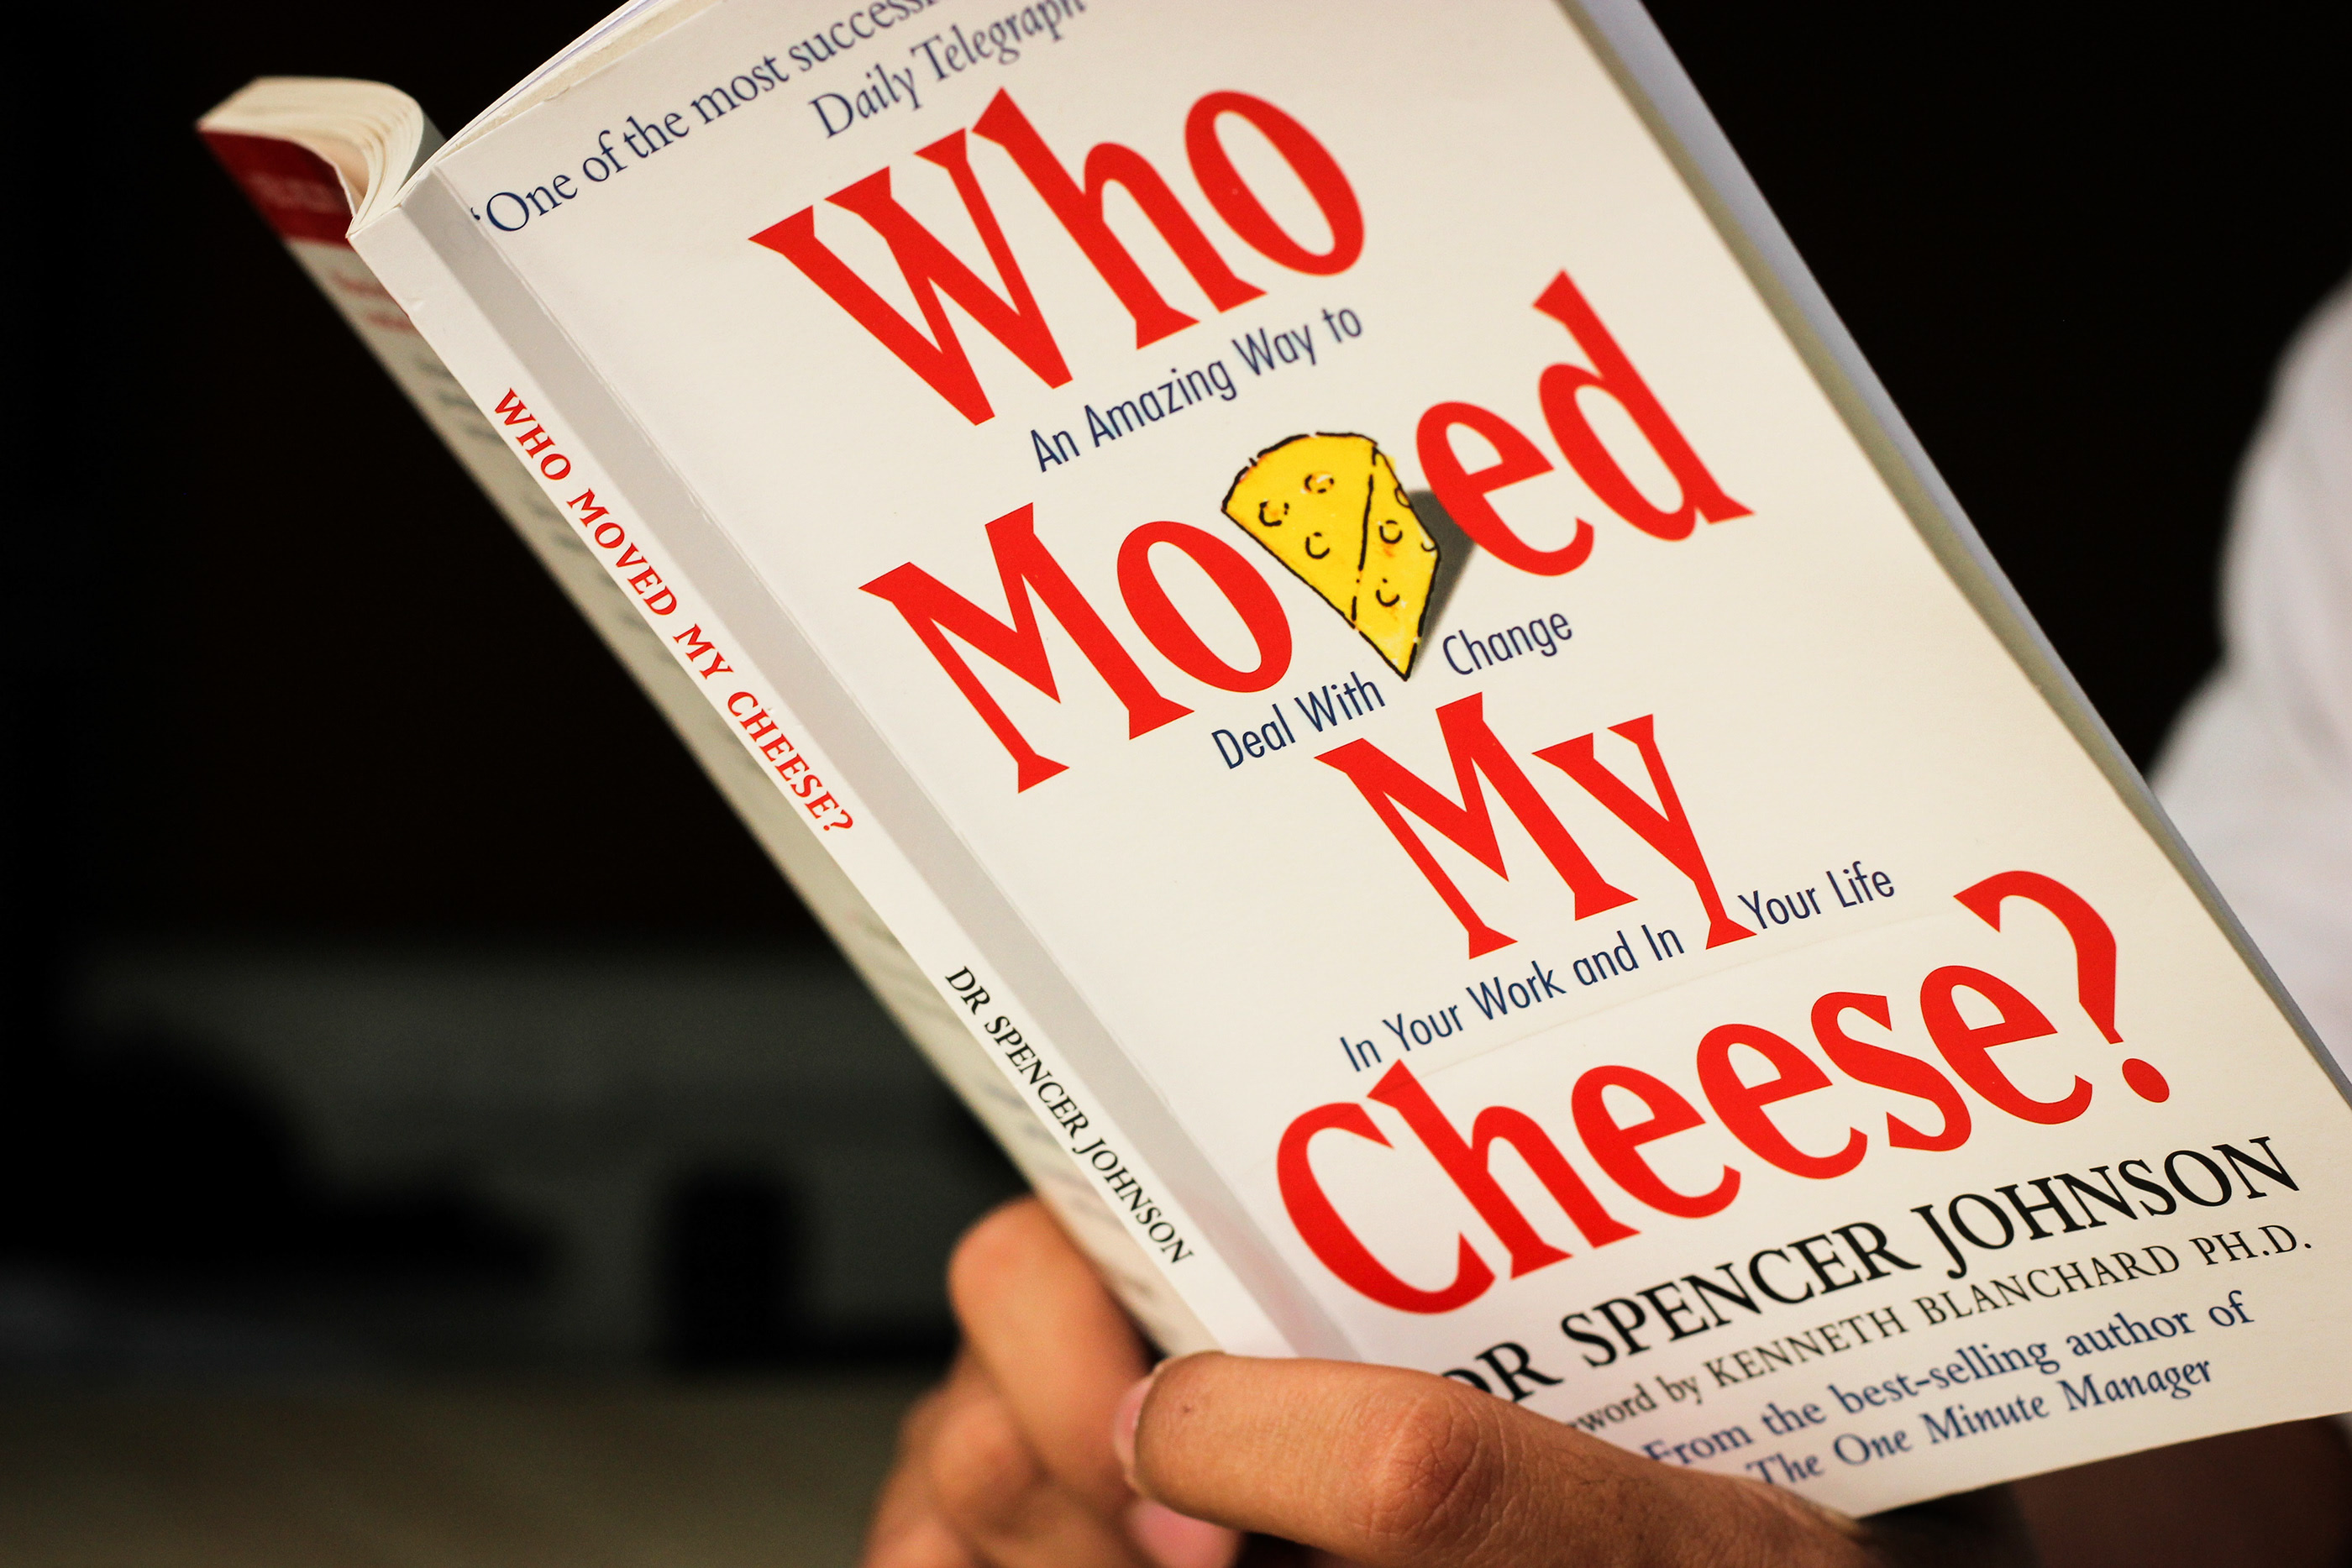 Who Moved My Cheese : Best business books for beginners